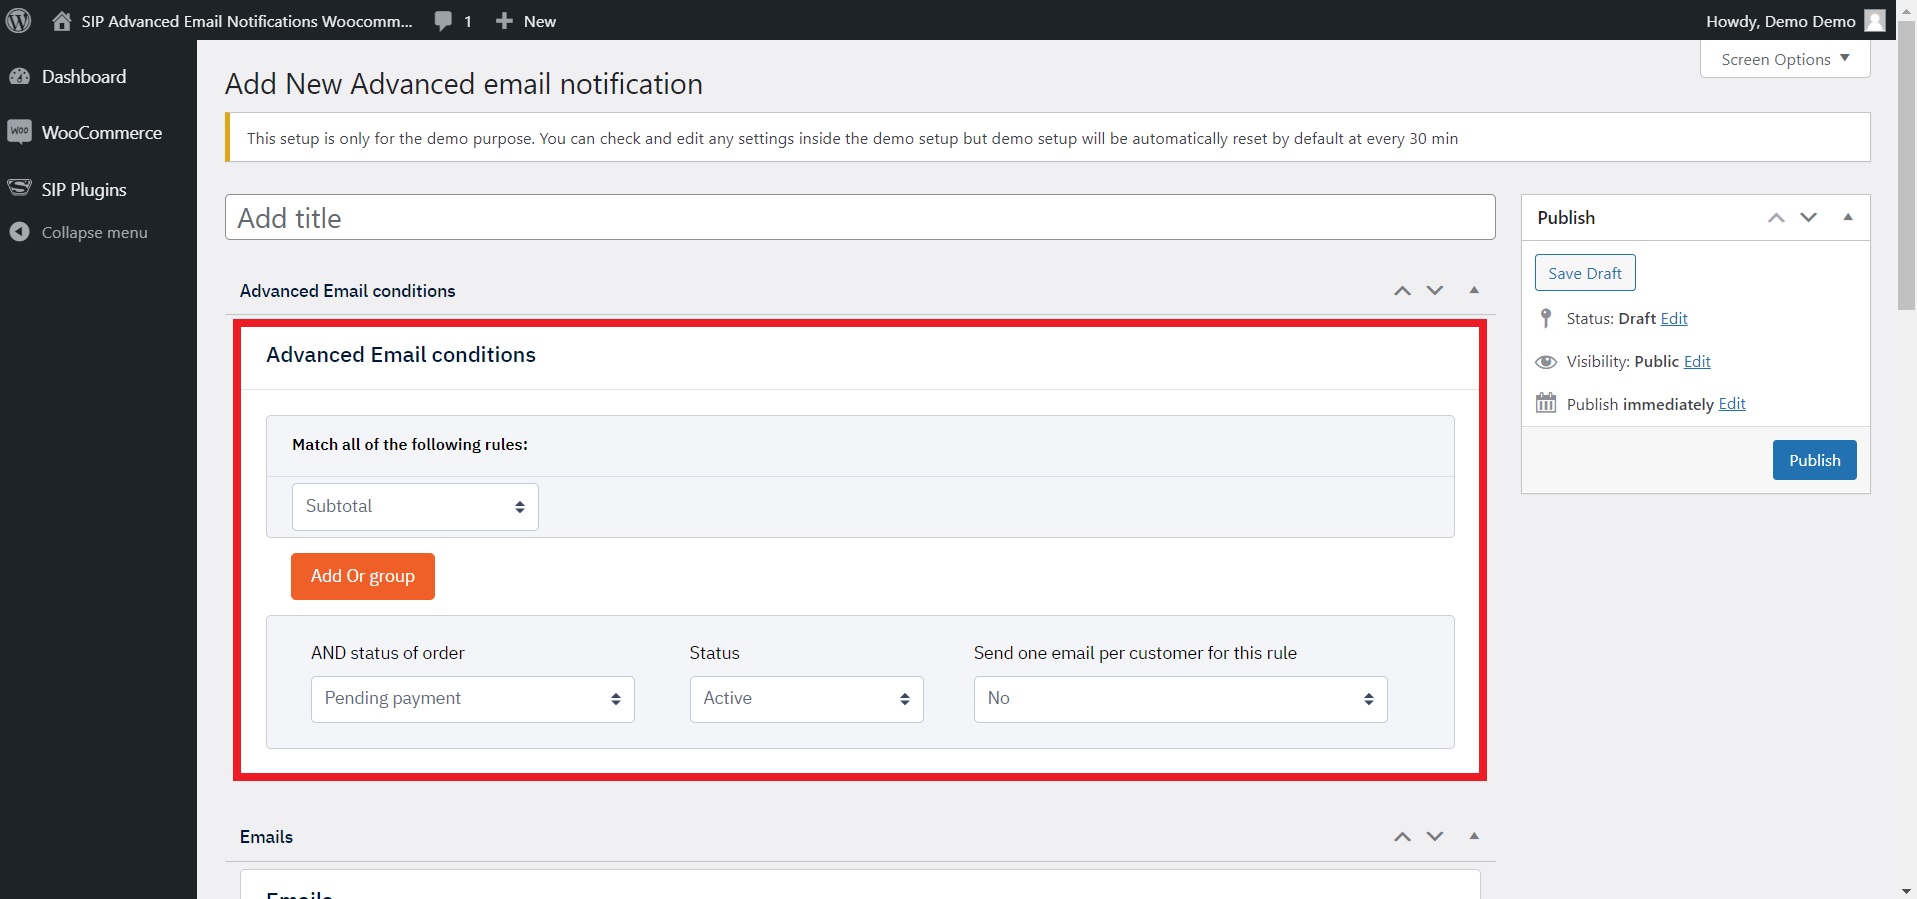 Now, you will see a new page, showing options for adding advanced email conditions.